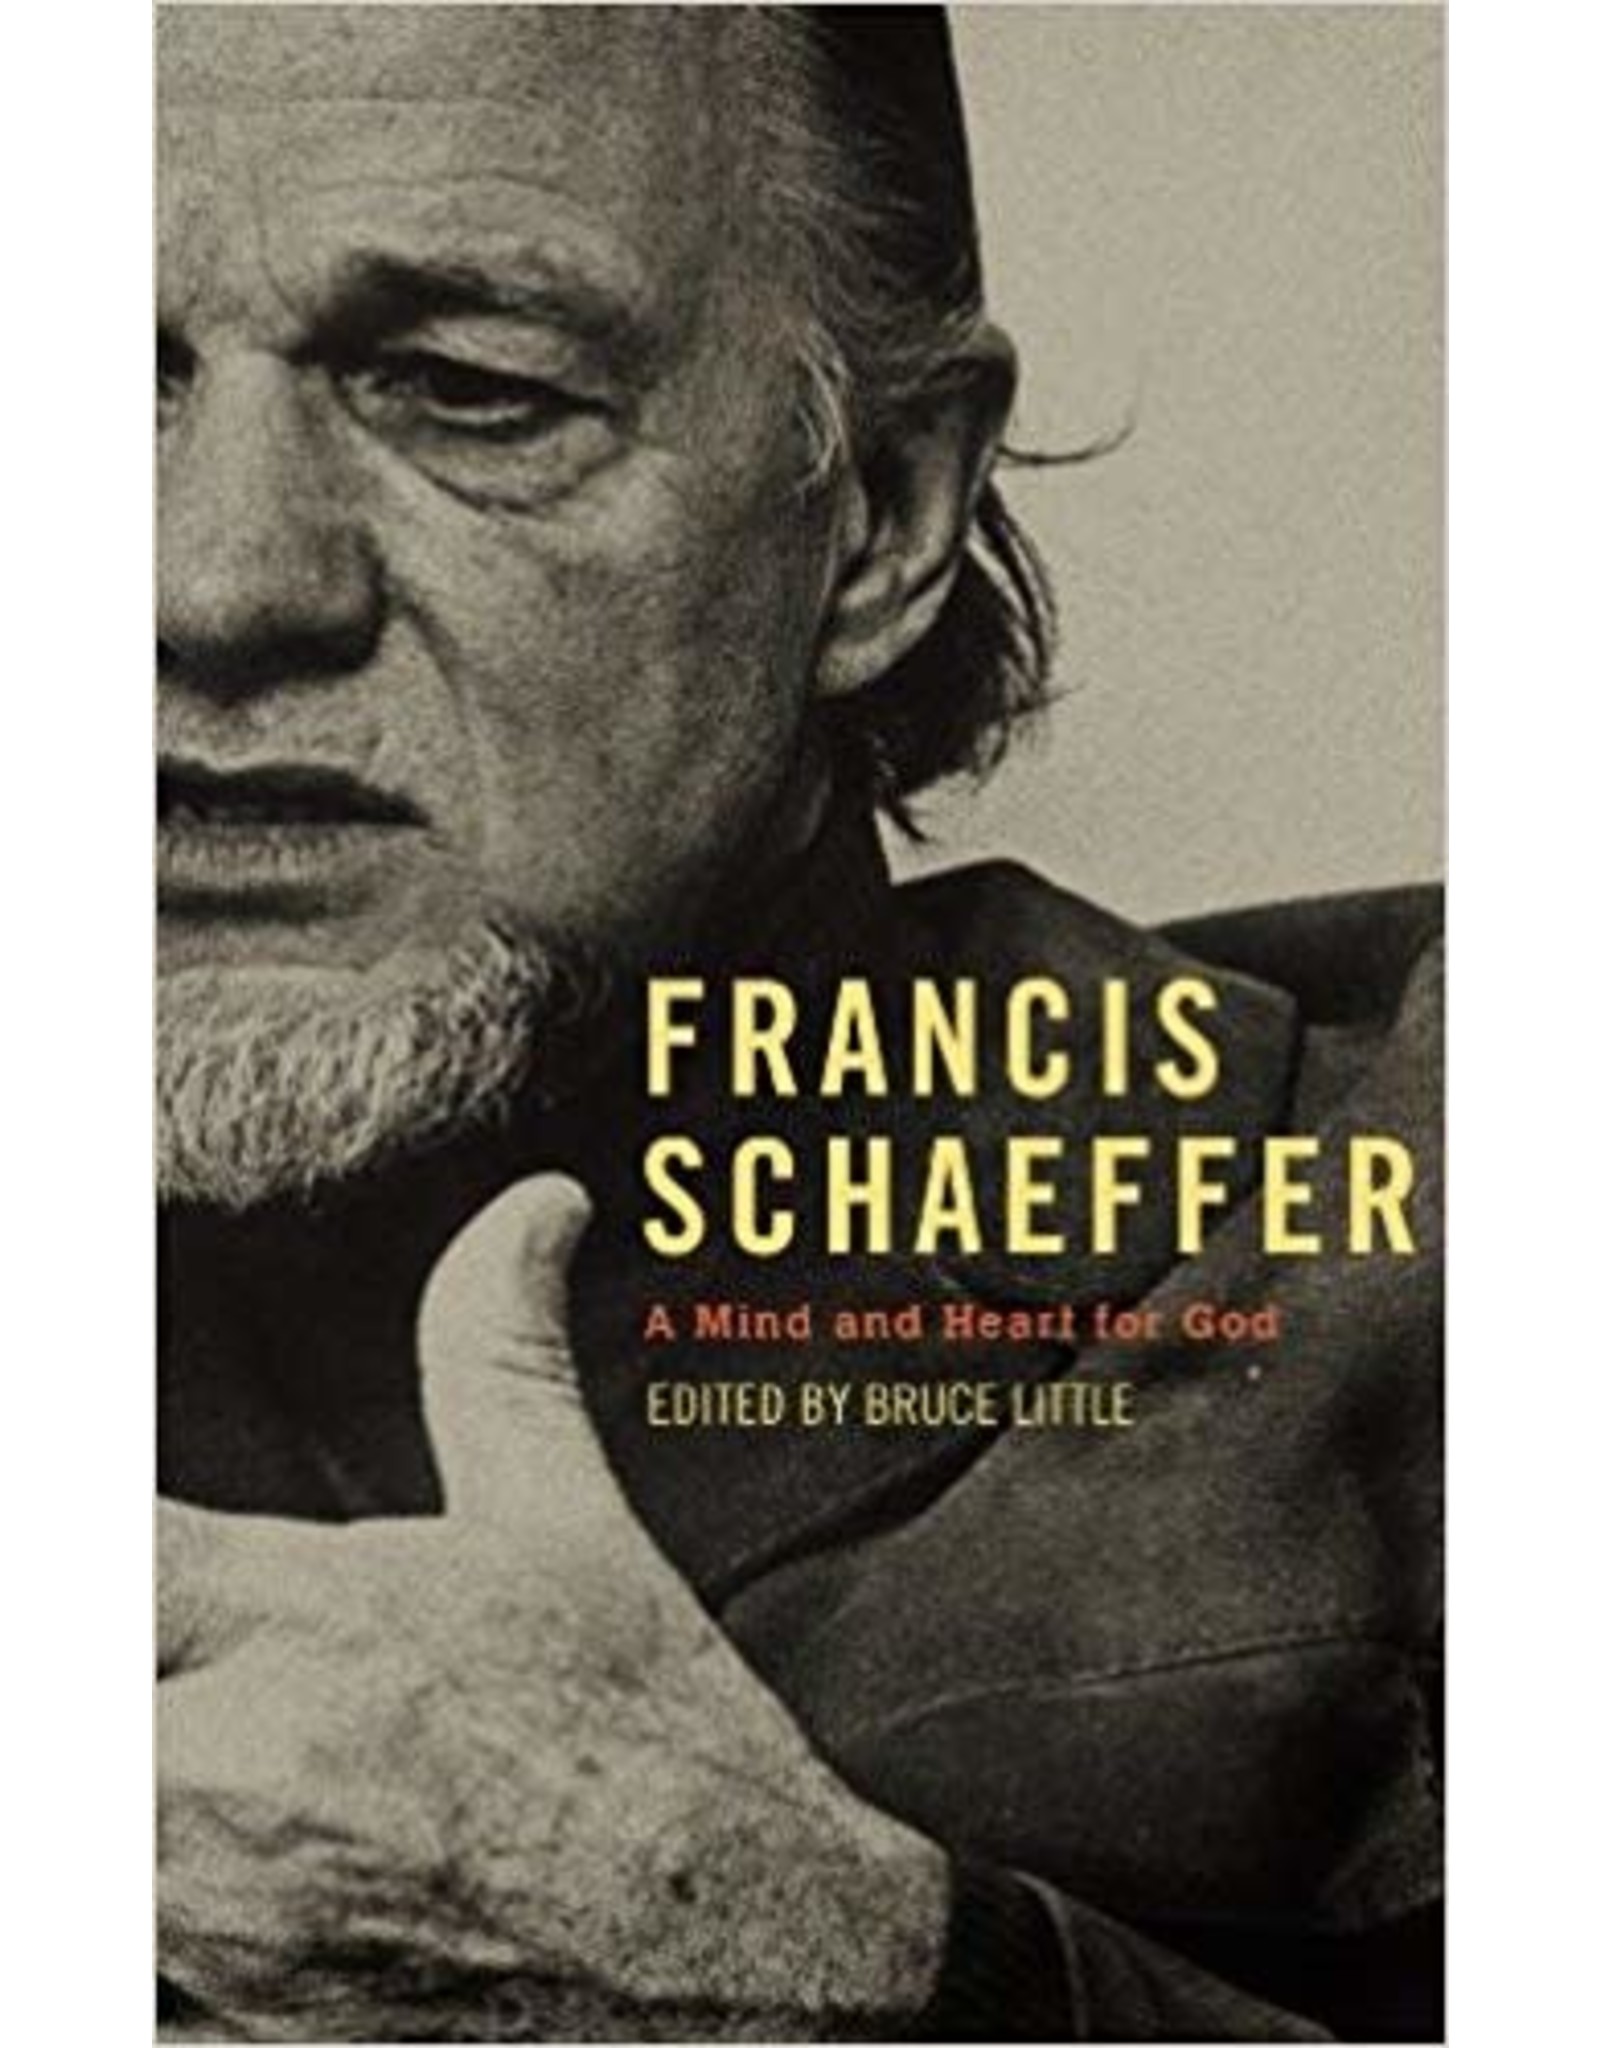 Little Francis Schaeffer, A Mind and Heart for God